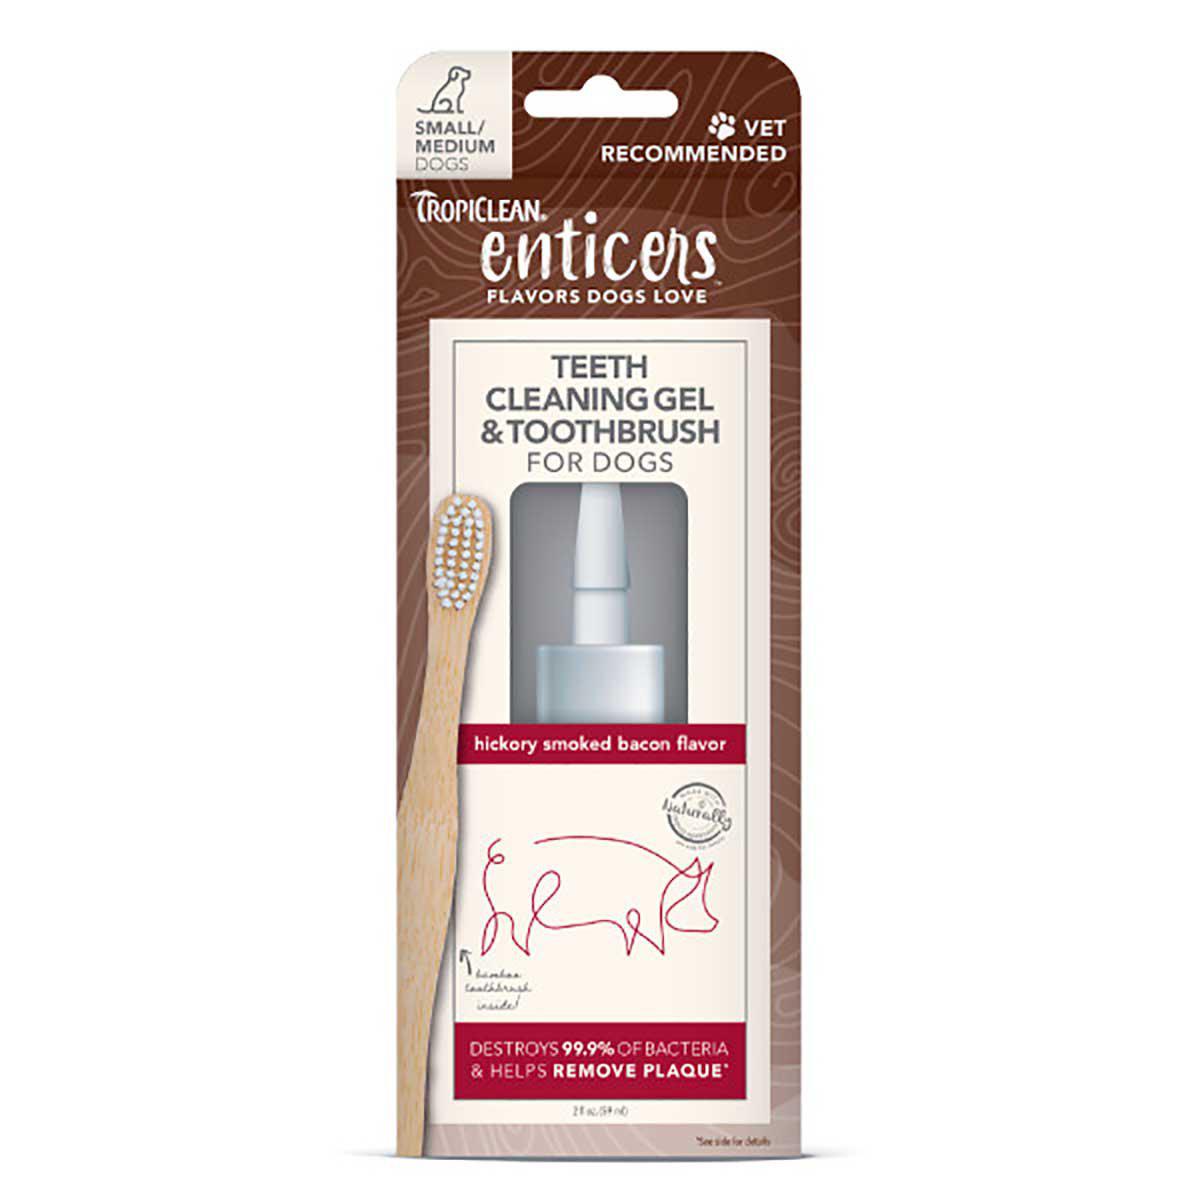 TROPICLEAN - Enticers Gel&Brush S/M Dogbacon 59Ml - (719.1112)